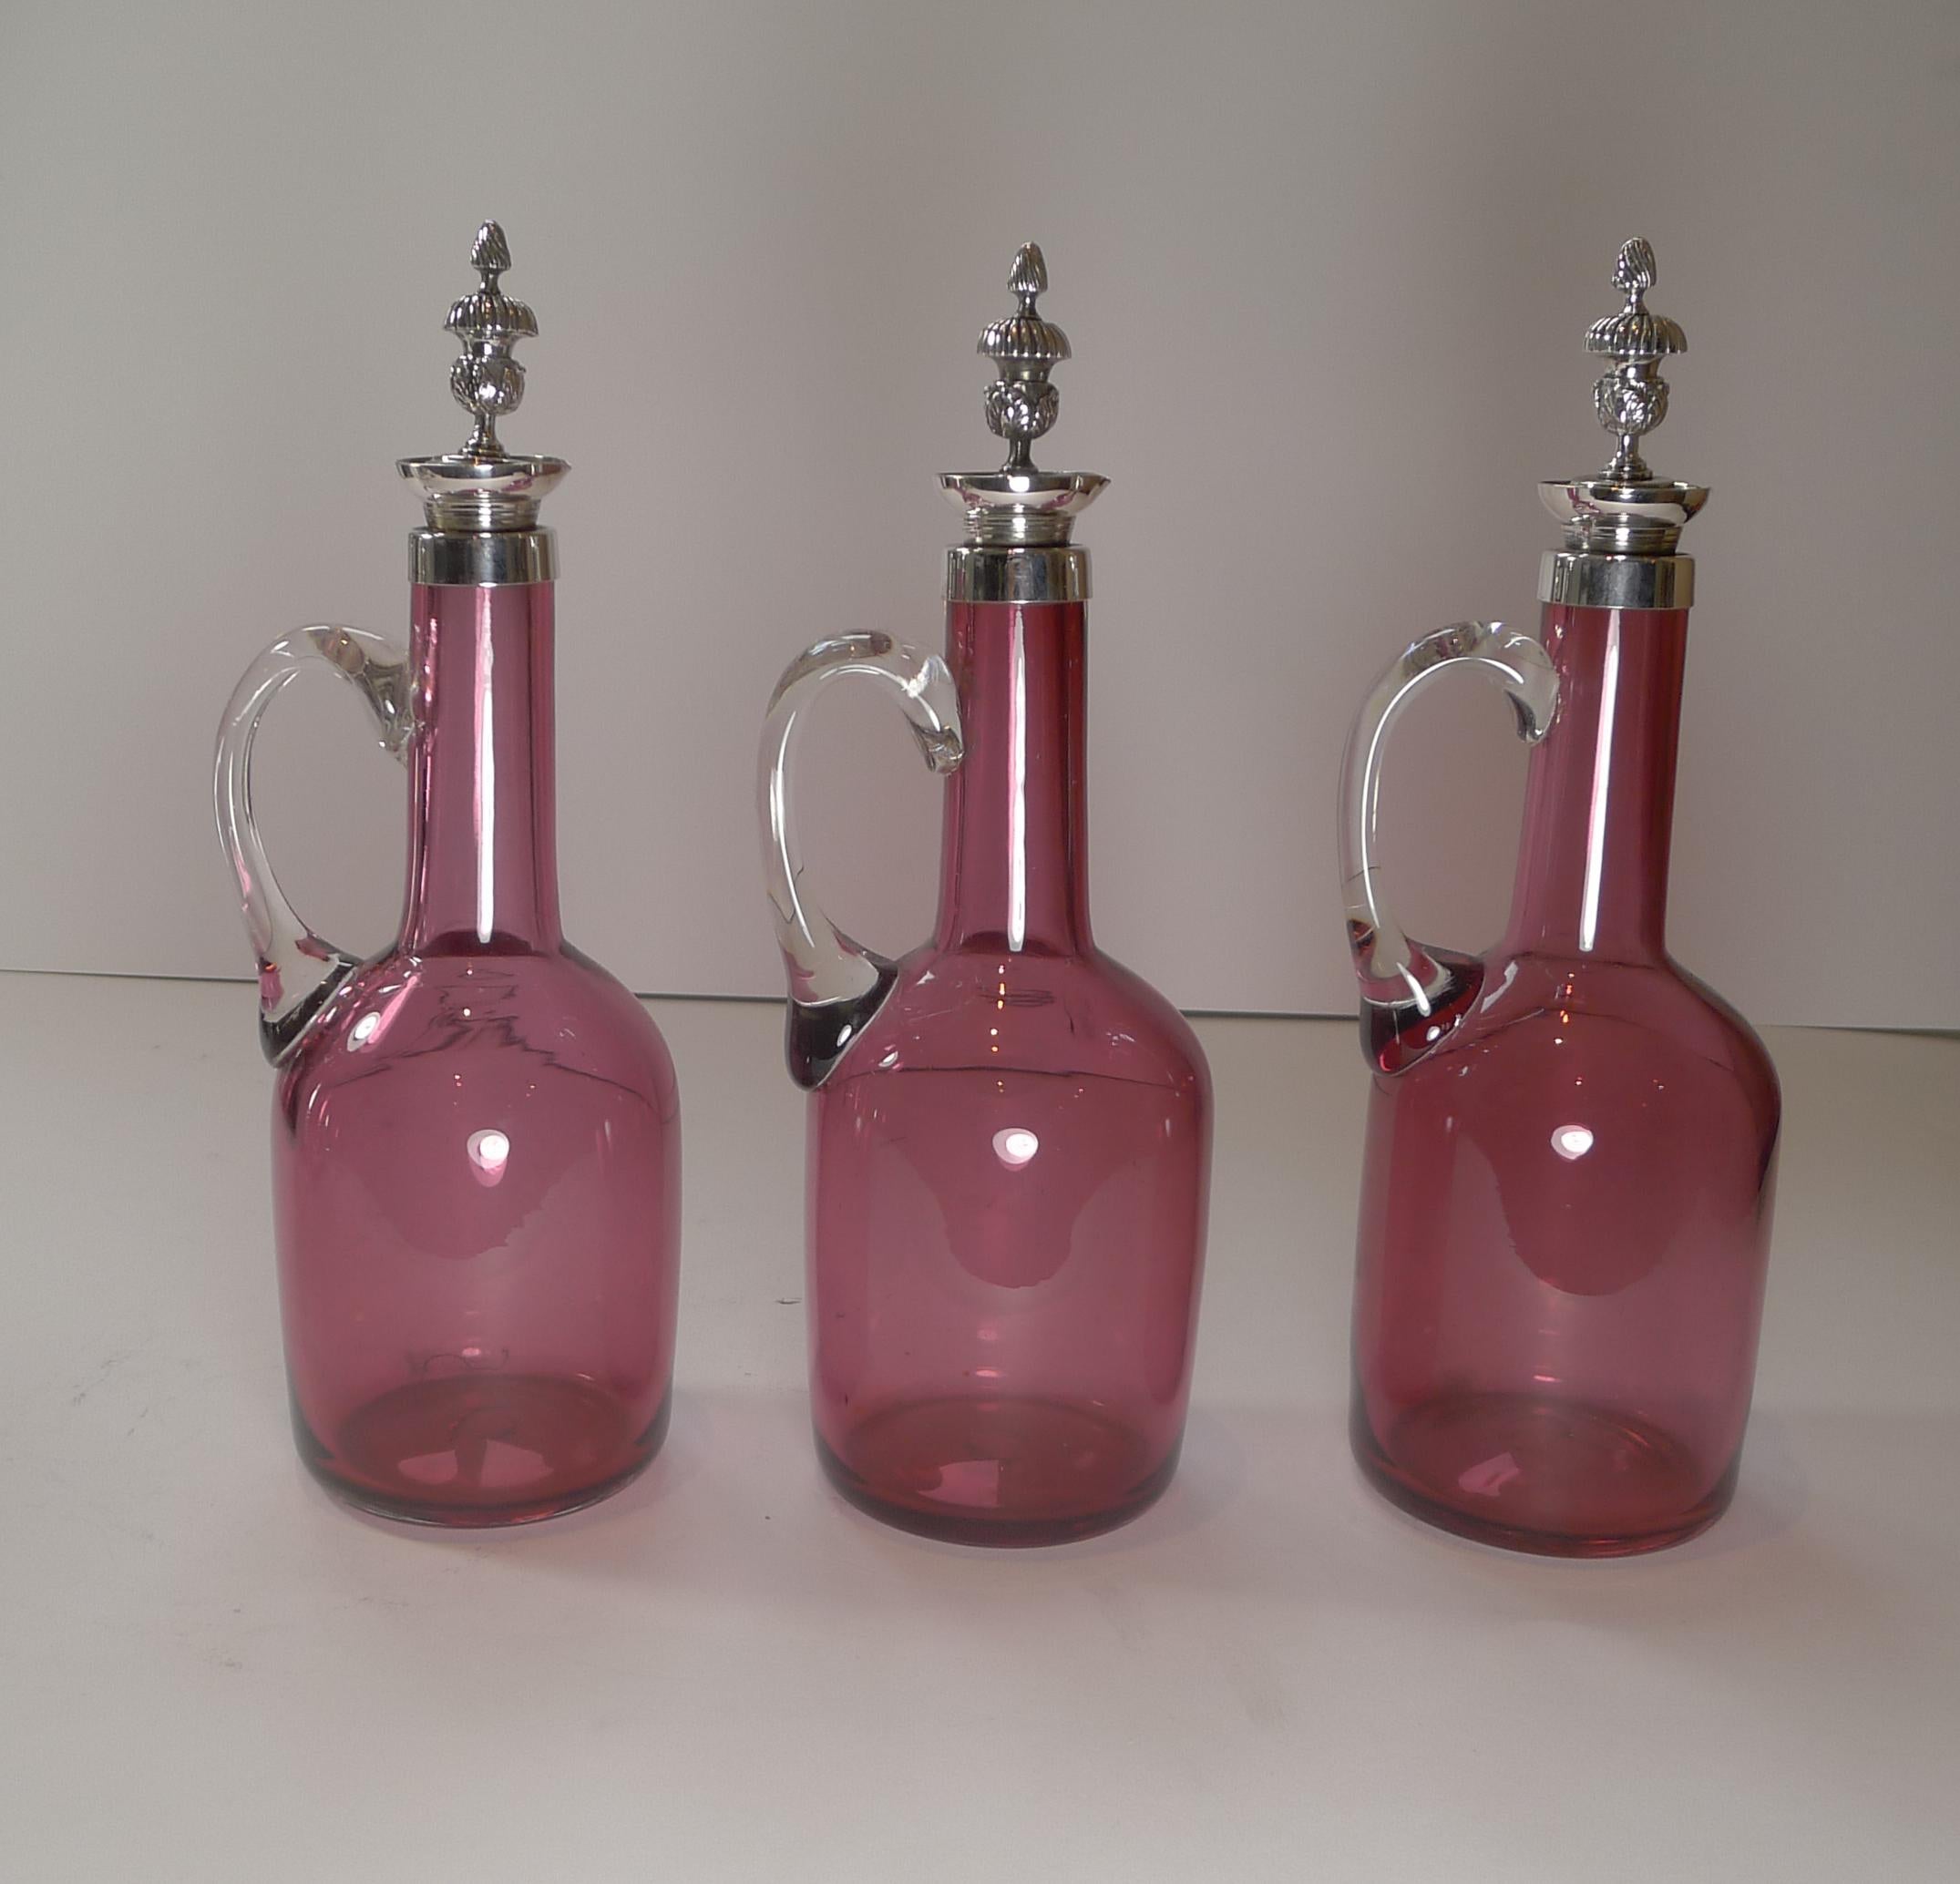 The silver plated caddy stands on exquisite feet and the three decanter holders beautifully pierced or reticulated.

The three cranberry glass decanters, each with a clear glass handle are topped with their original stoppers.

Dating to c.1890,